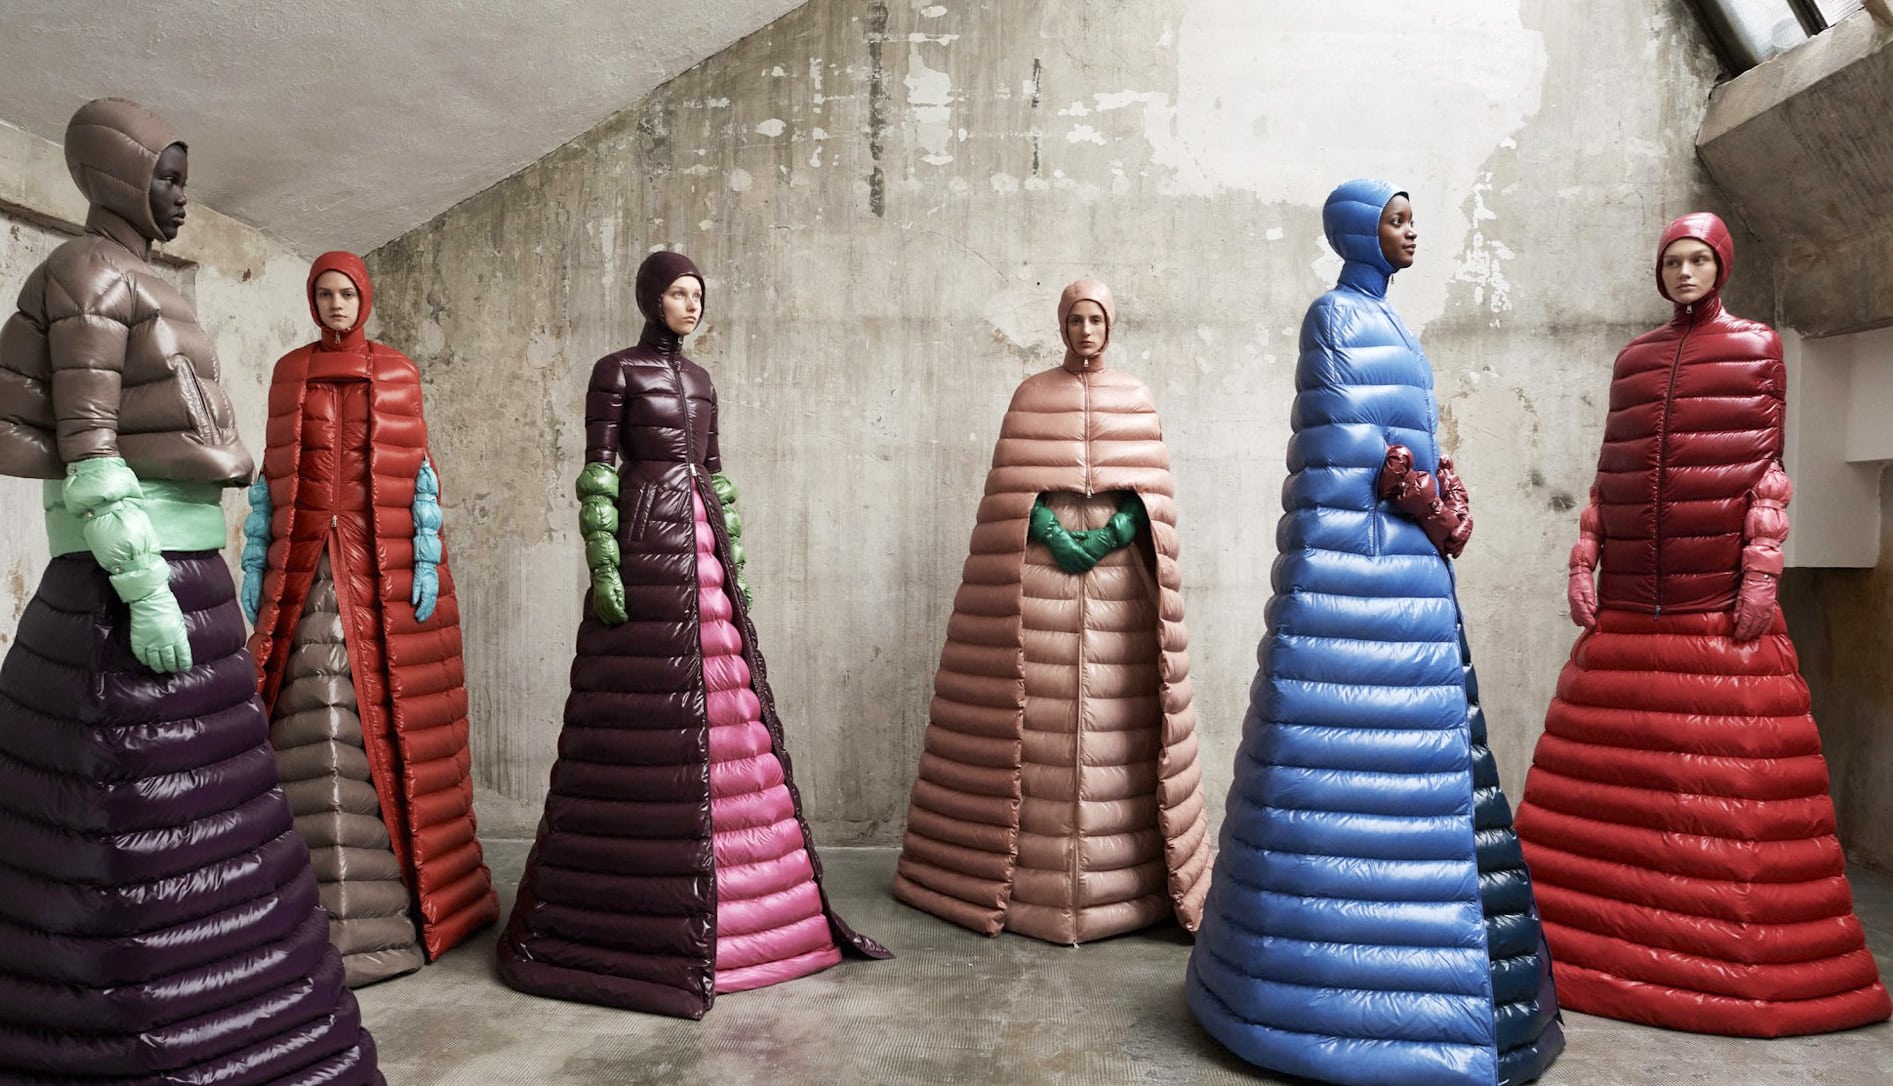 Pierpaolo Piccioli’s collection for Moncler Genius weaves a medieval dream